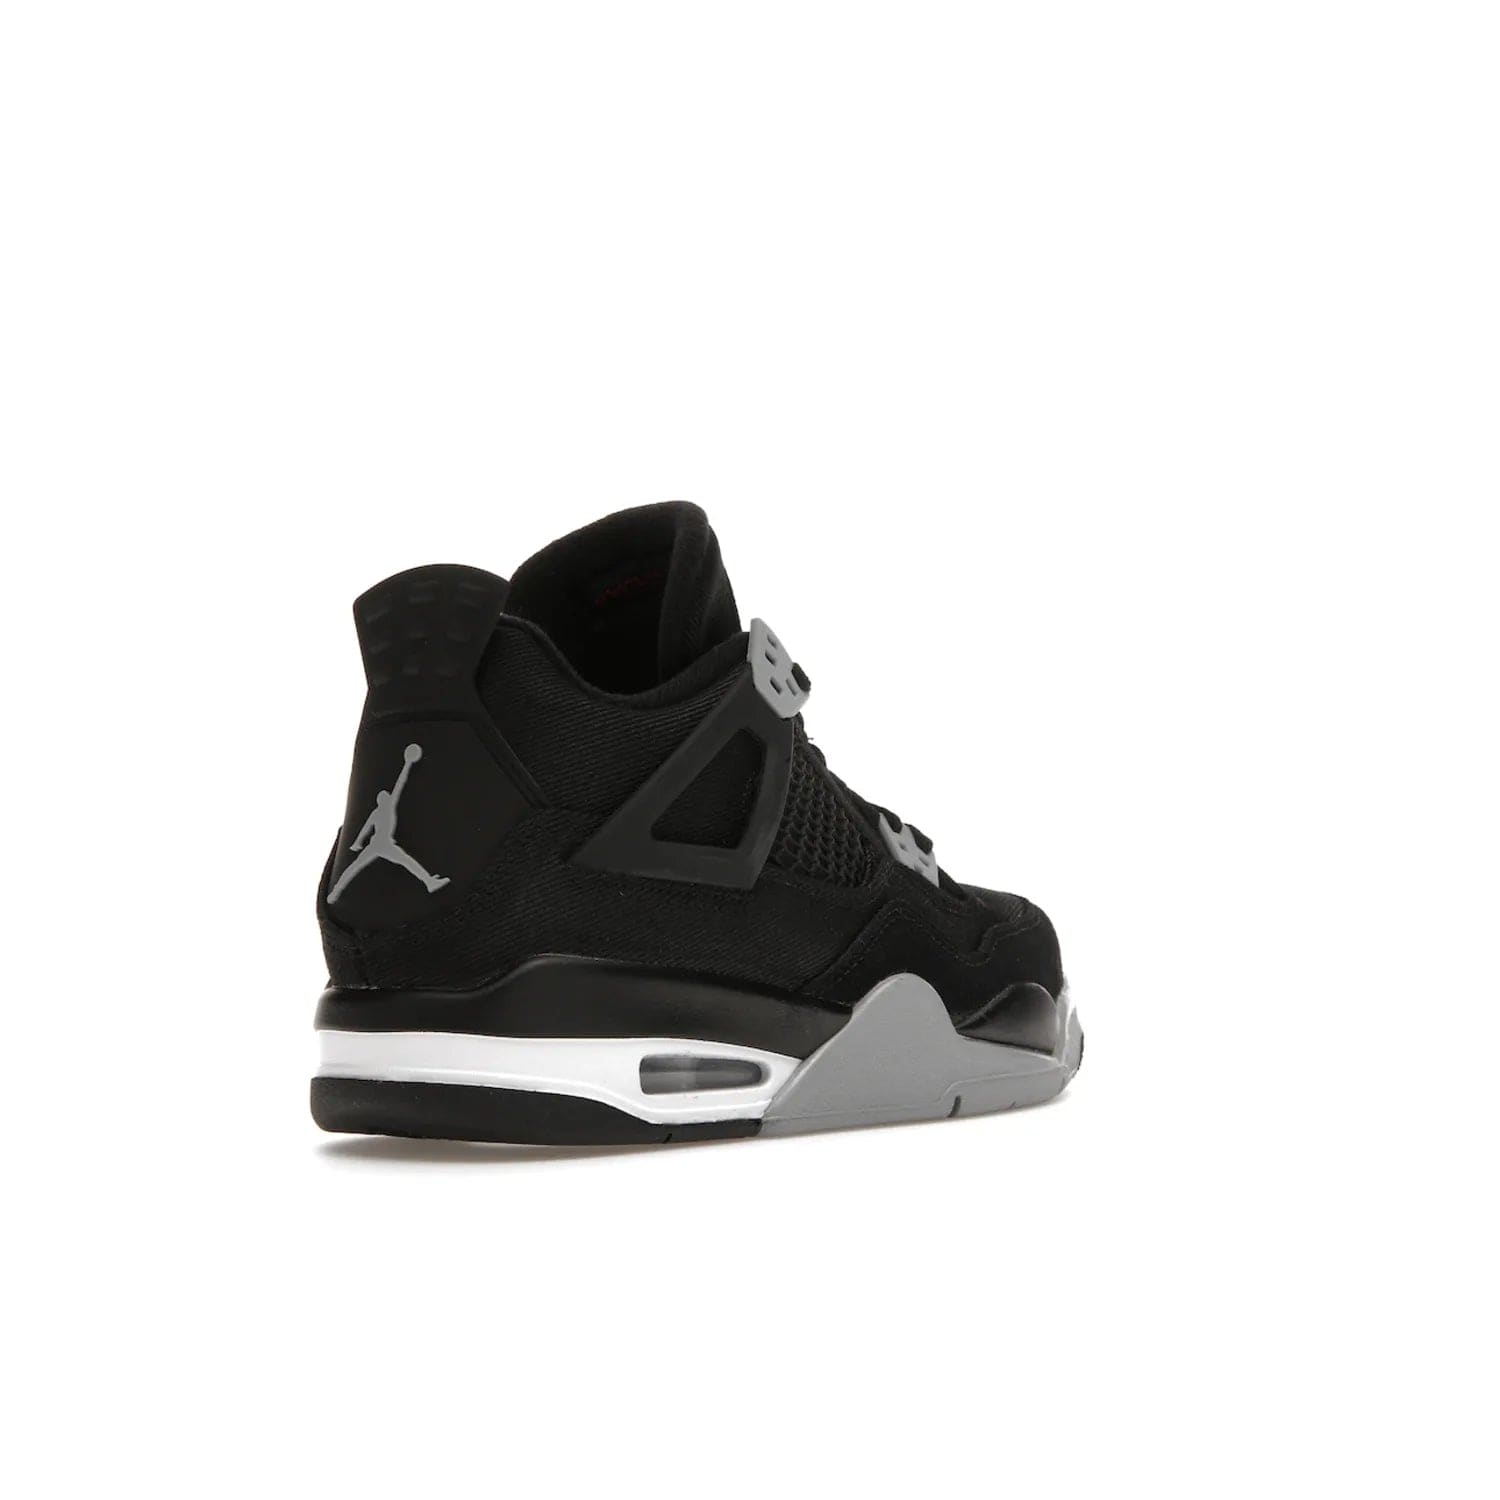 Jordan 4 Retro Black Canvas (GS) - Image 32 - Only at www.BallersClubKickz.com - Premium Air Jordan 4 Retro Black Canvas in grade-schooler's catalog. Featuring black suede canvas upper, grey molding, accents in red, white midsole, woven Jumpman tag, & visible AIR cushioning. Releasing Oct. 1, 2022.